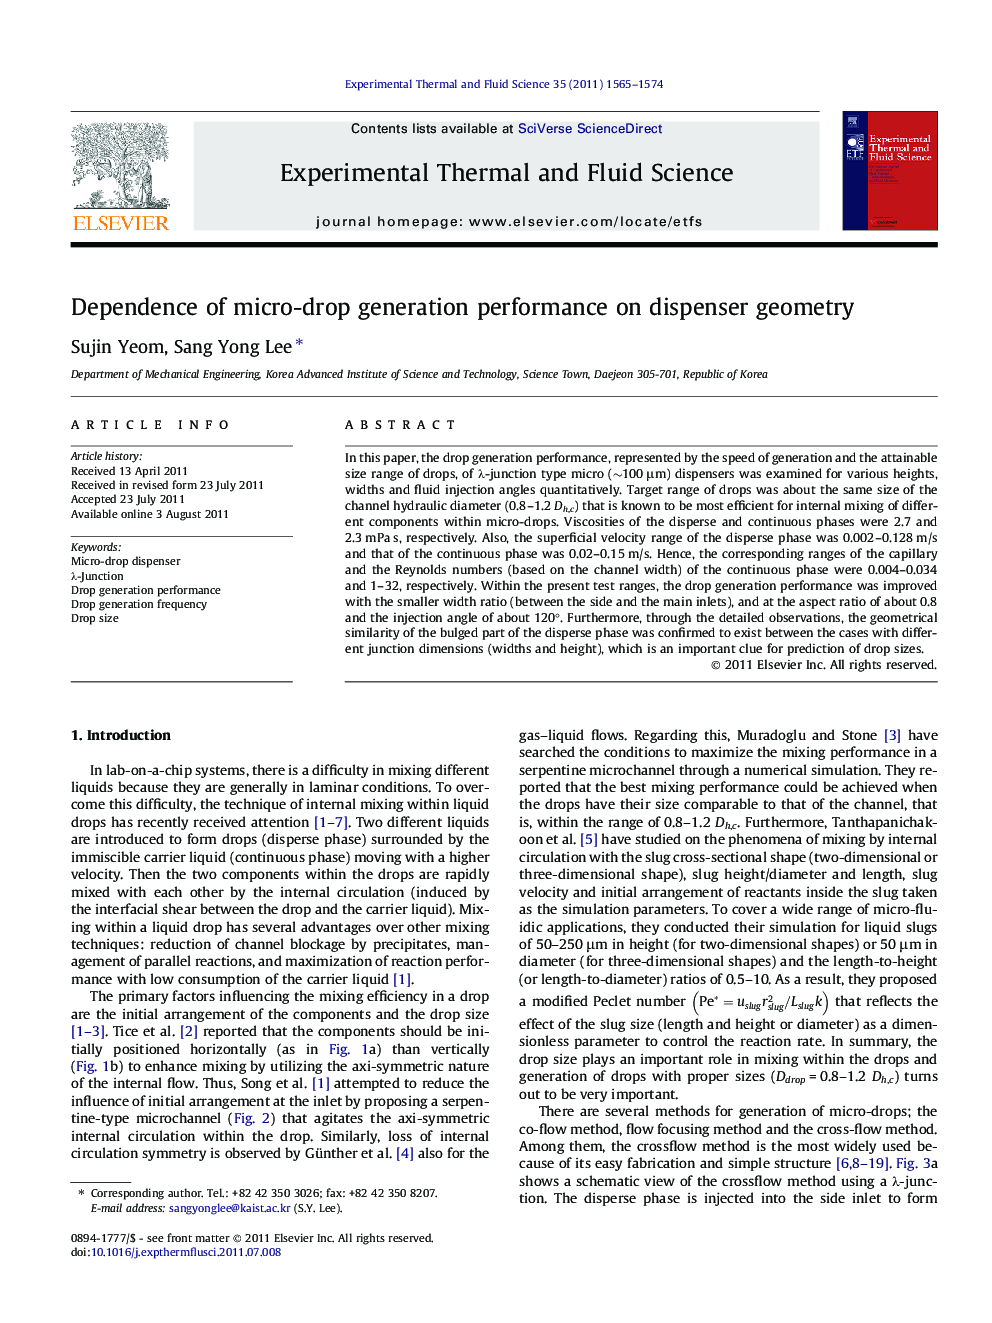 Dependence of micro-drop generation performance on dispenser geometry